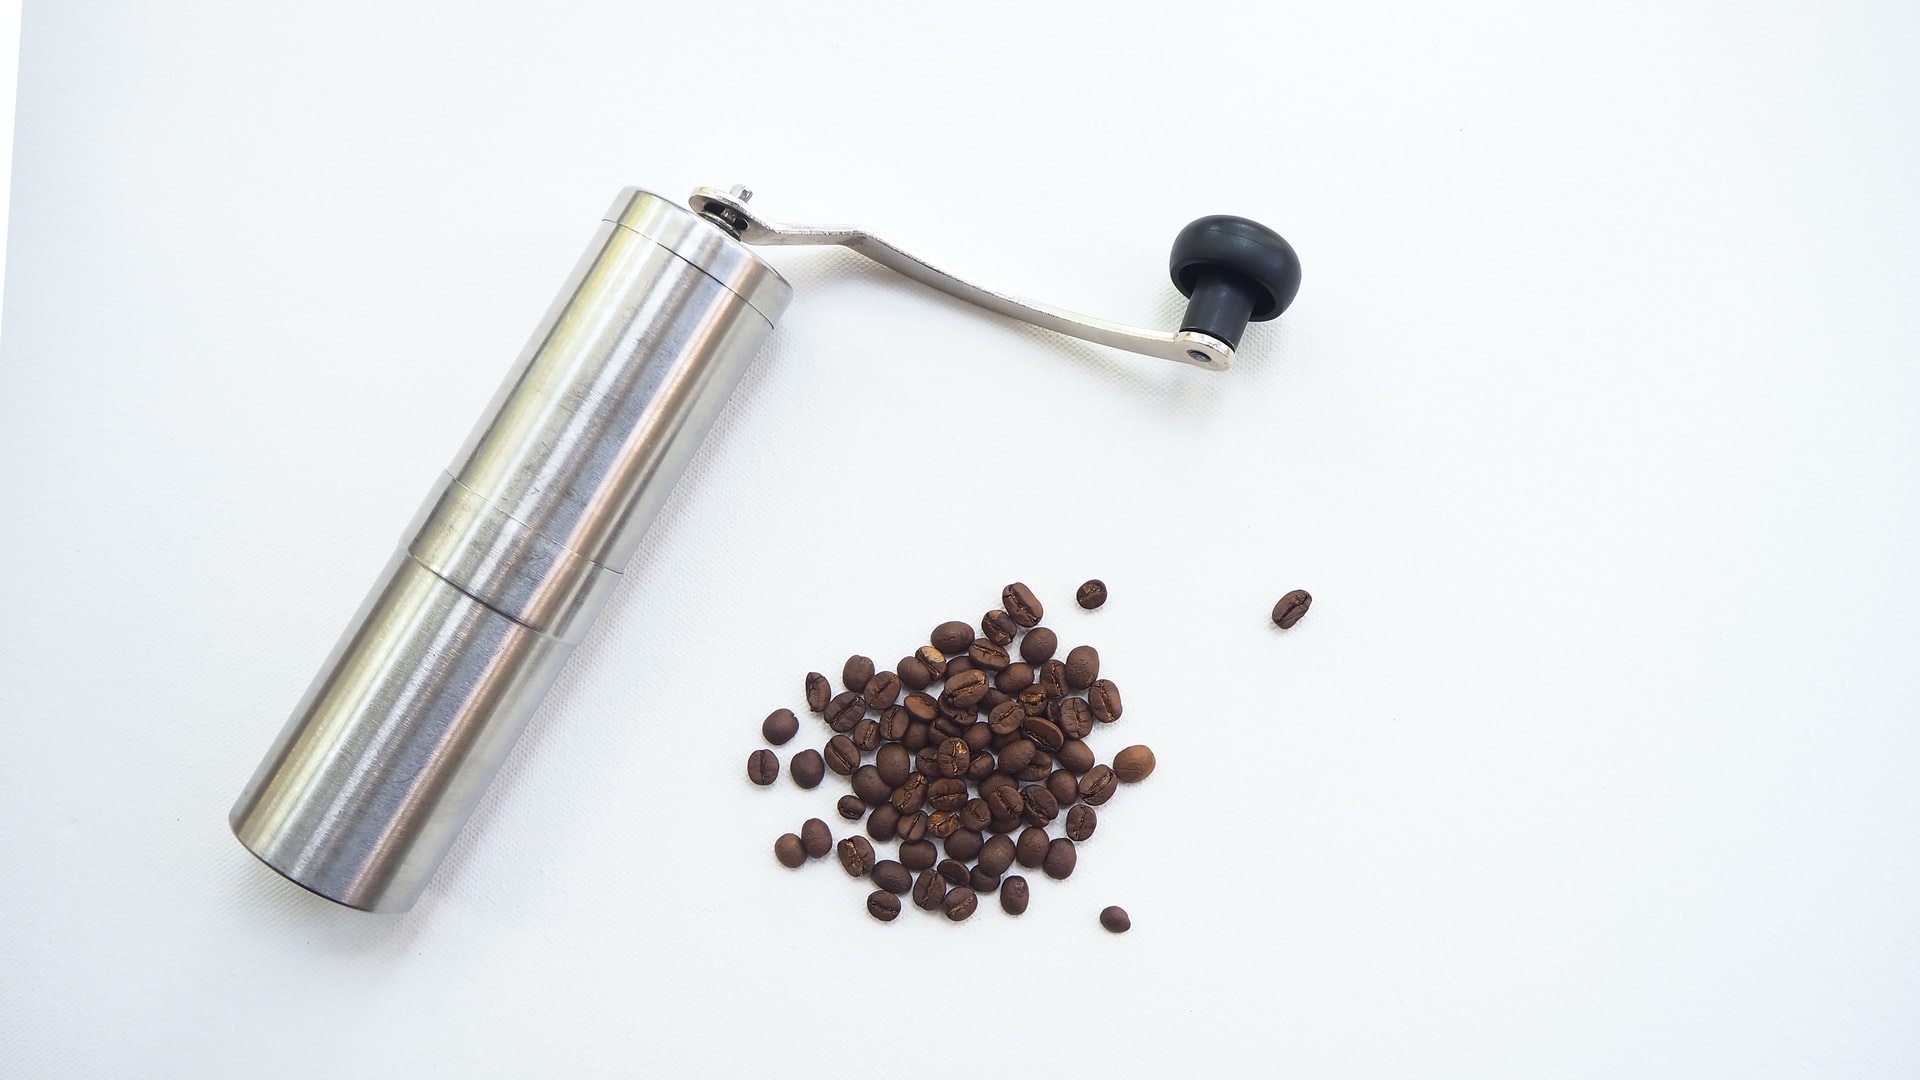 How to Clean a Coffee Grinder